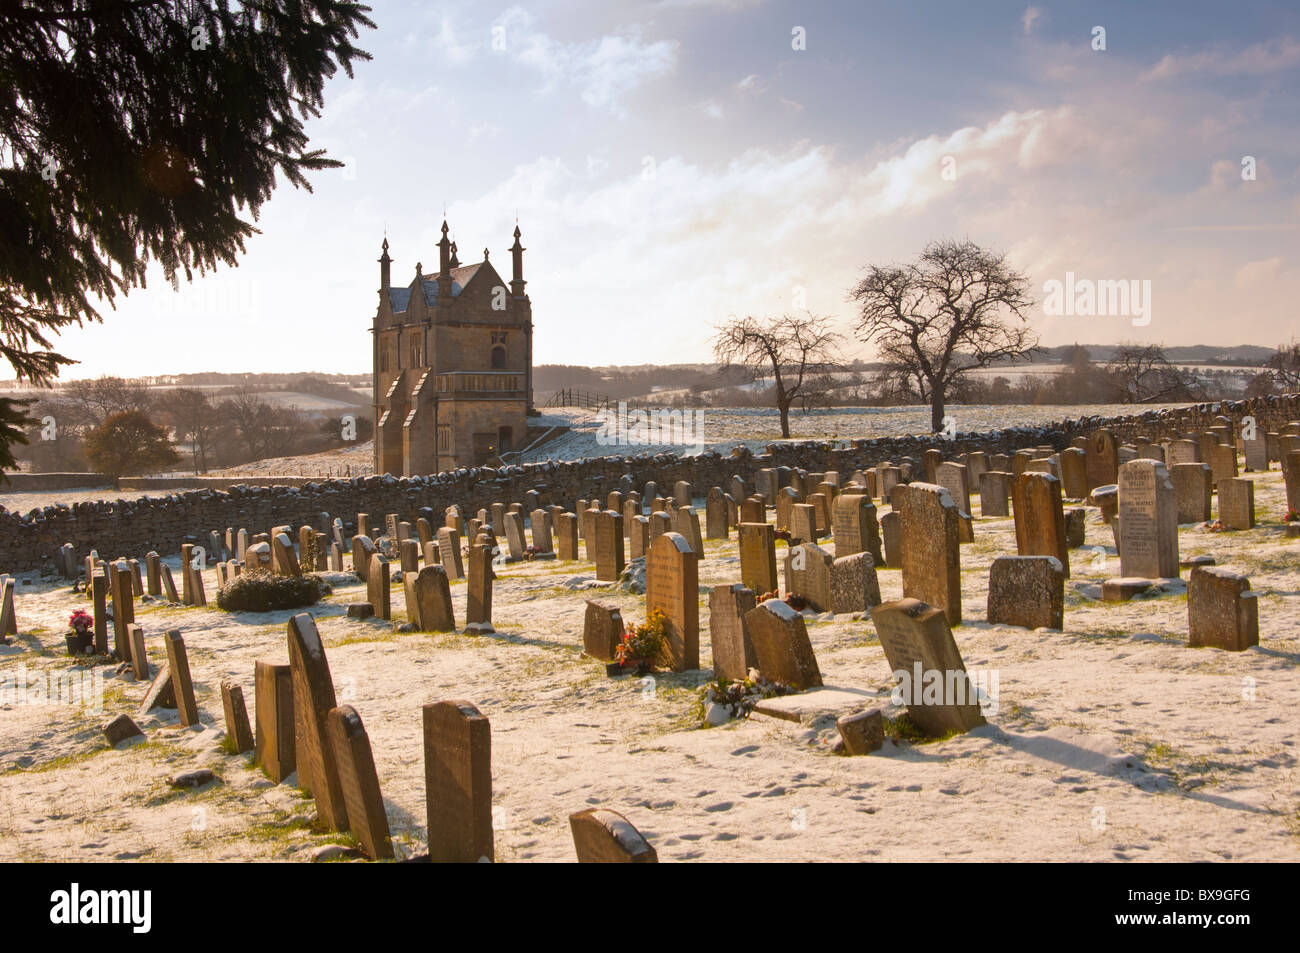 A winter graveyard in the Cotswold village of Chipping Campden. England. Stock Photo